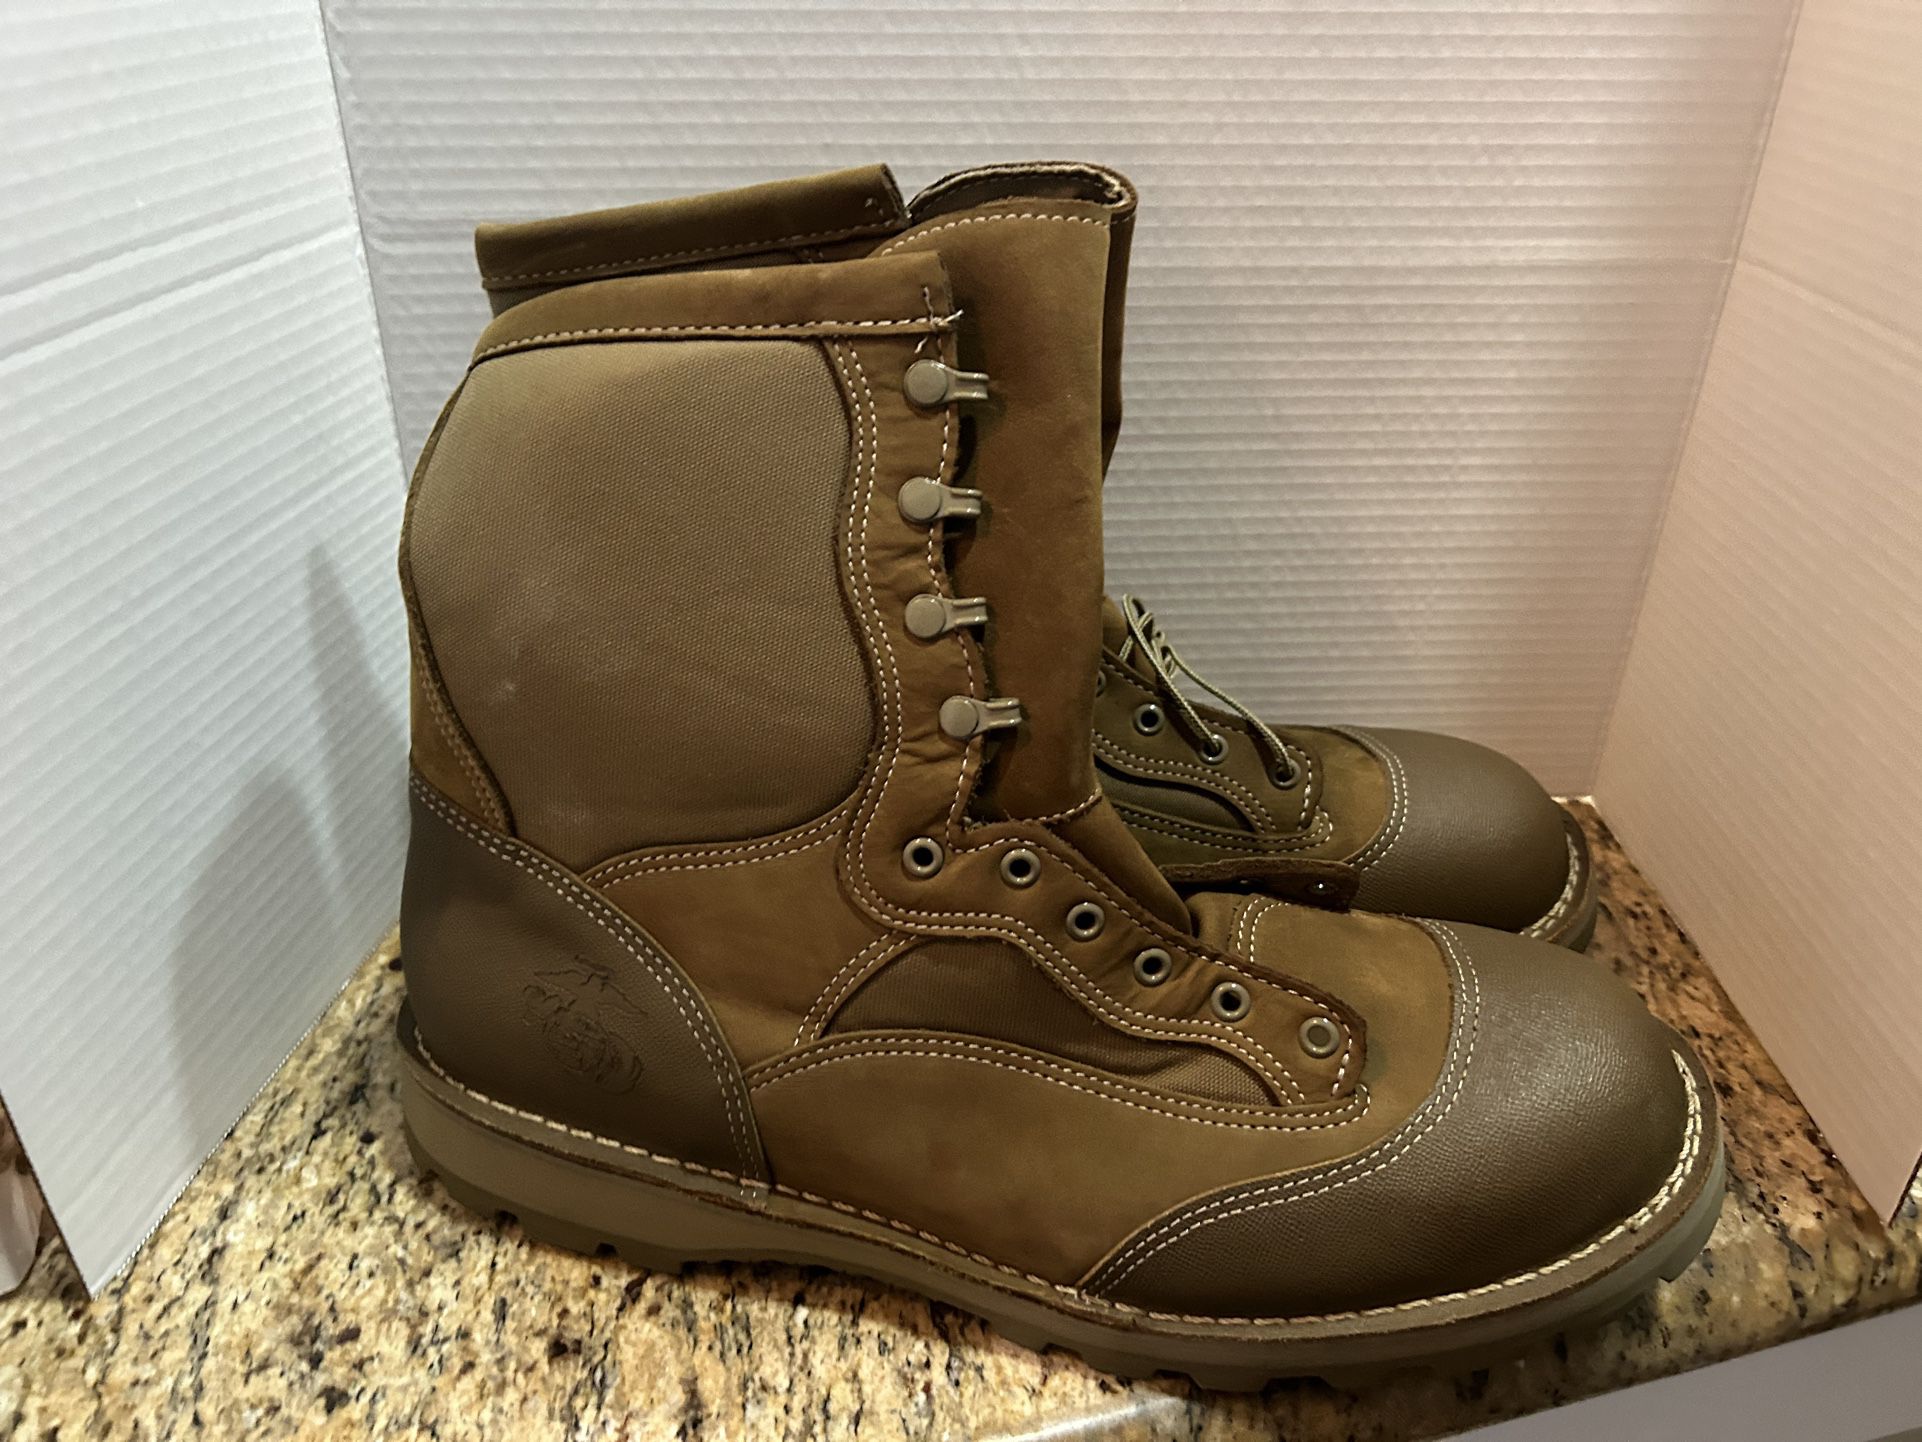 Brand New Size 15 1/2 Military Boots